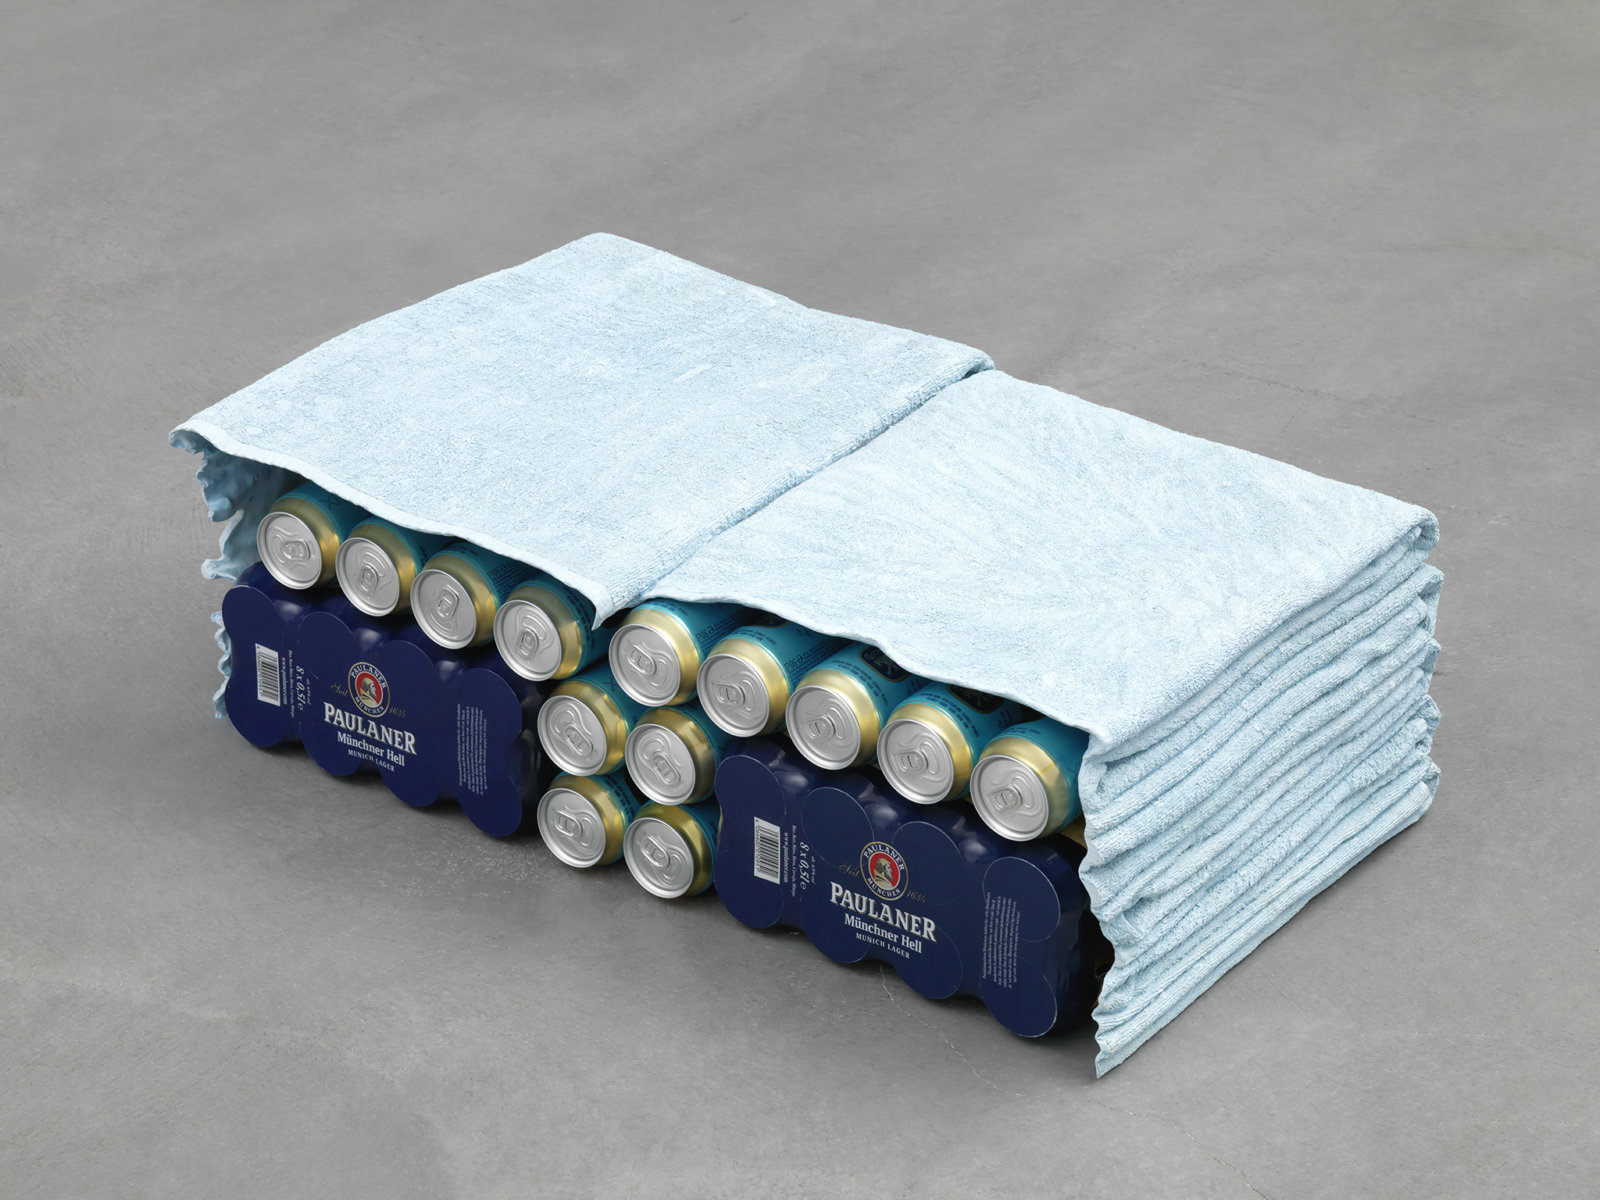 Liz Magor, Double Cabinet (blue), 2001, polymerized gypsum, cans of beer, 9 x 27 x 17 in. (24 x 69 x 43 cm)